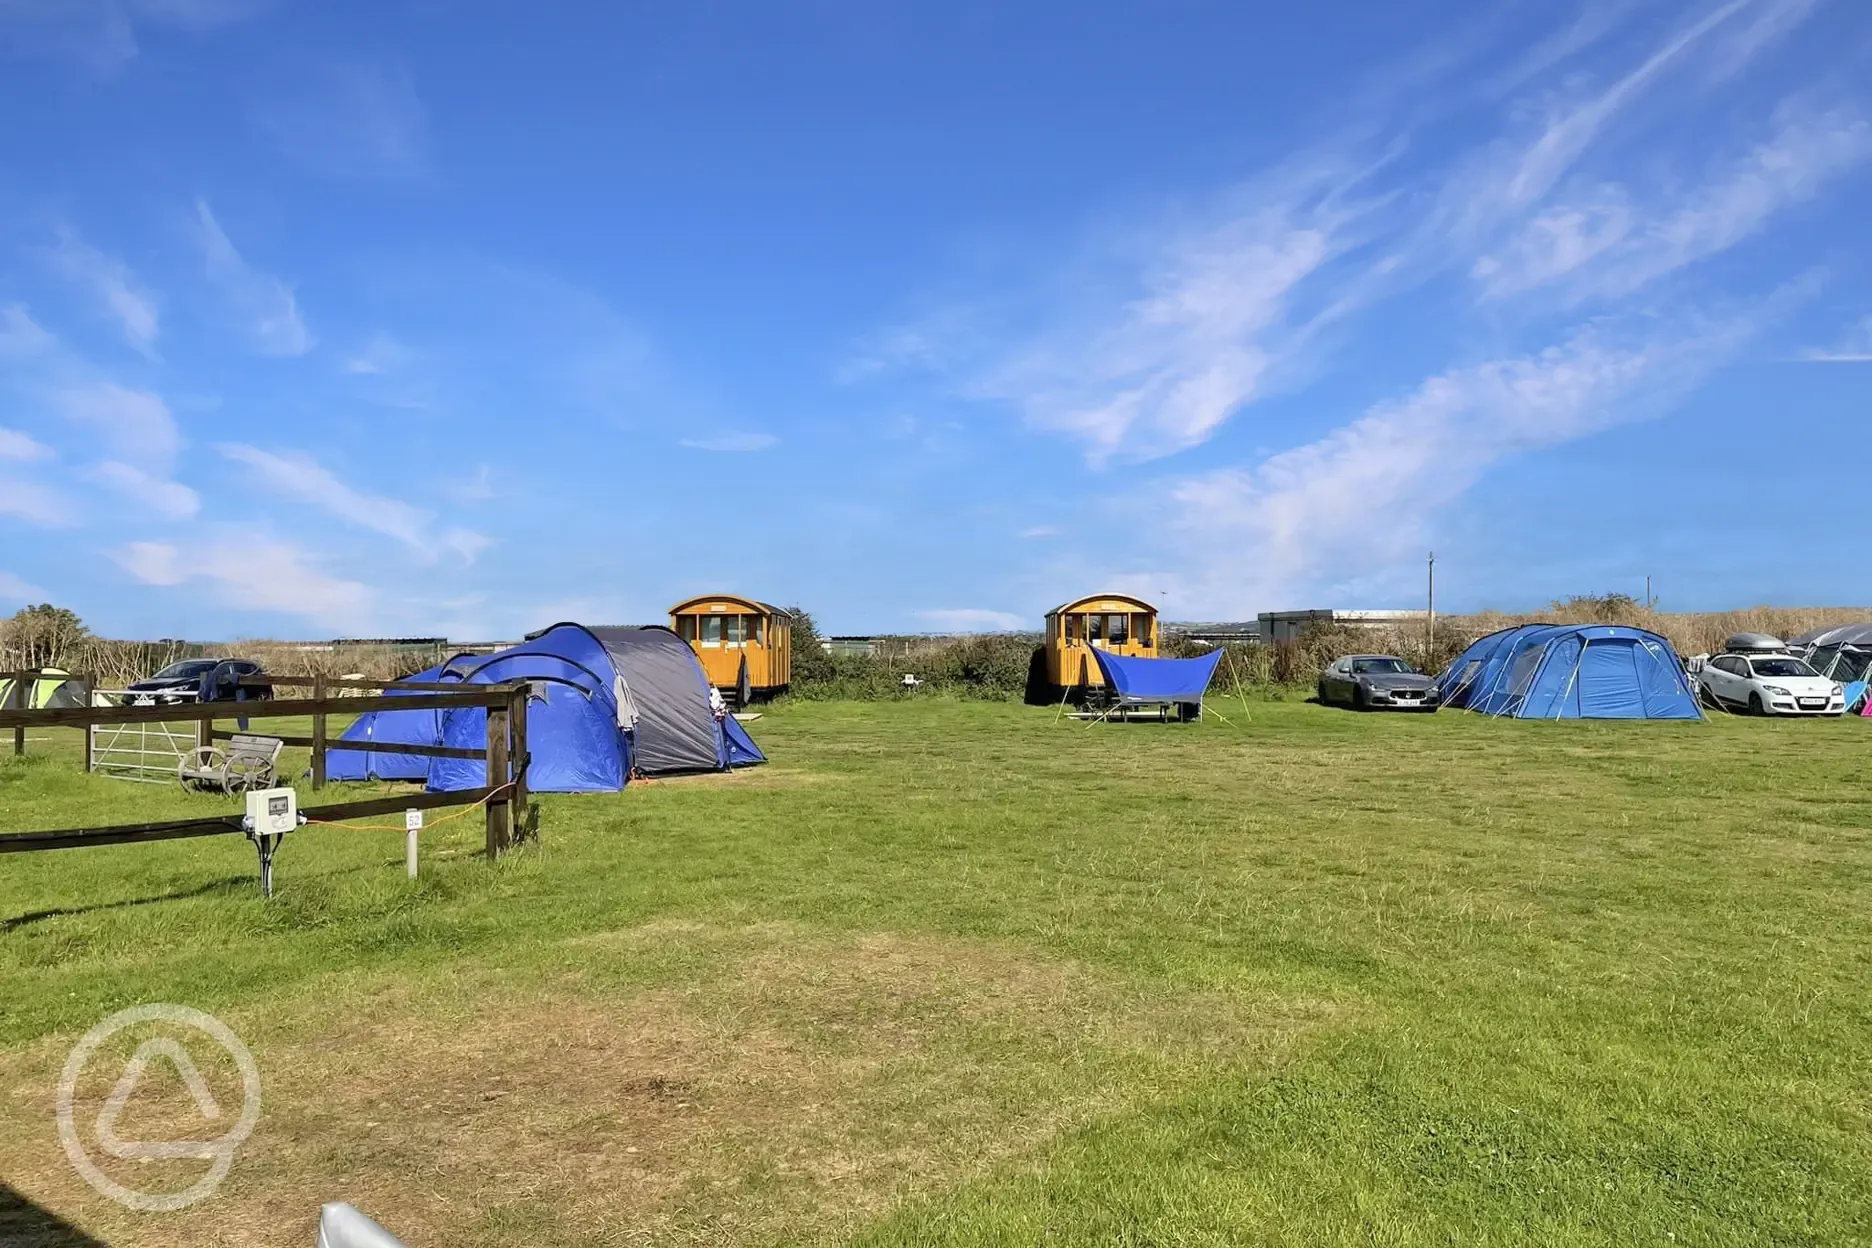 Shepherd's huts and grass pitches